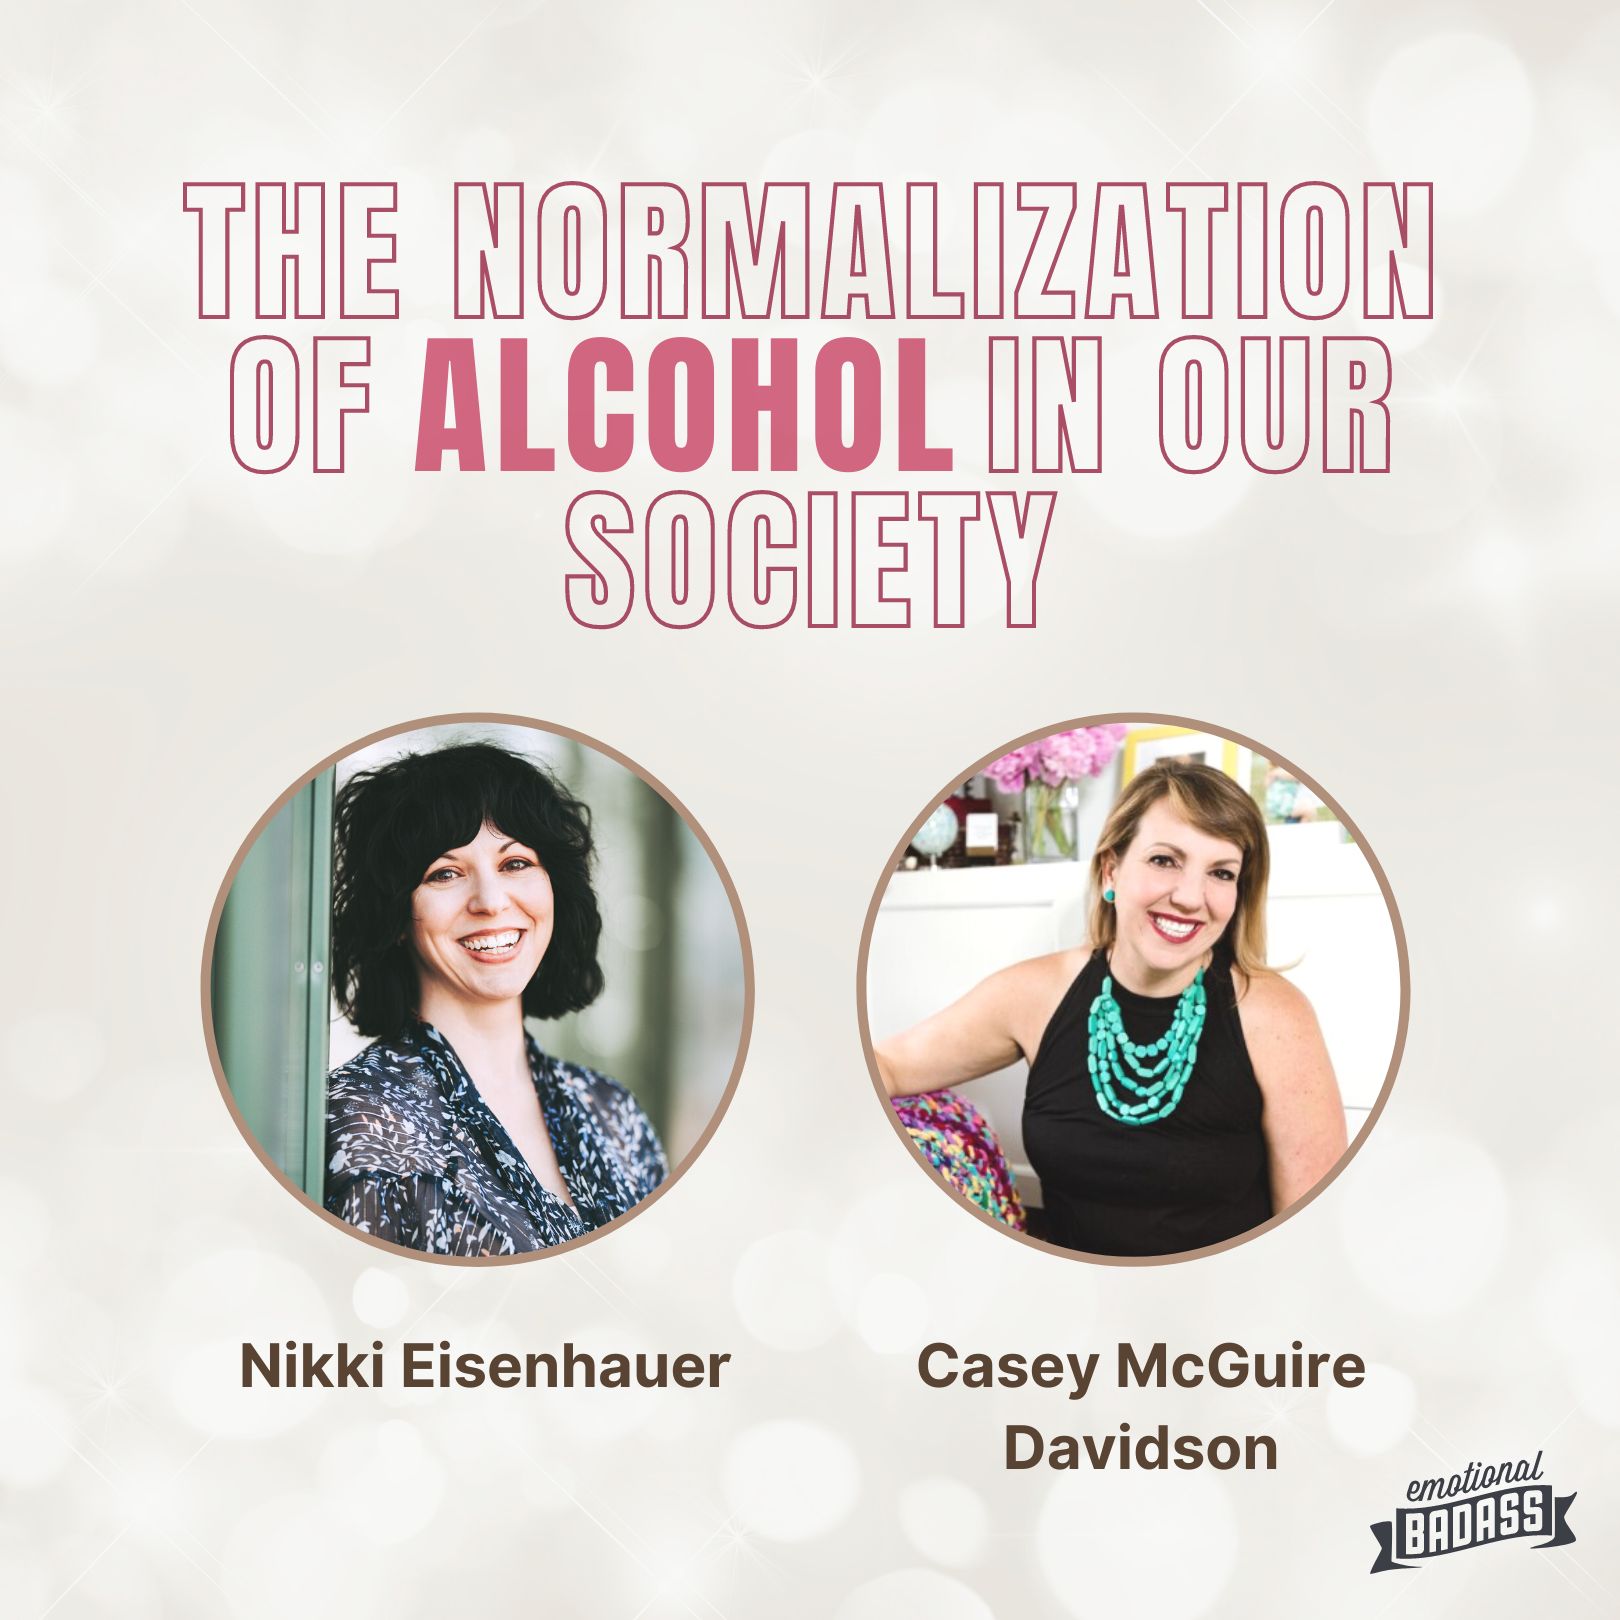 The Normalization of Alcohol in our Society, an Interview with Casey McGuire Davidson on the Emotional Badass podcast